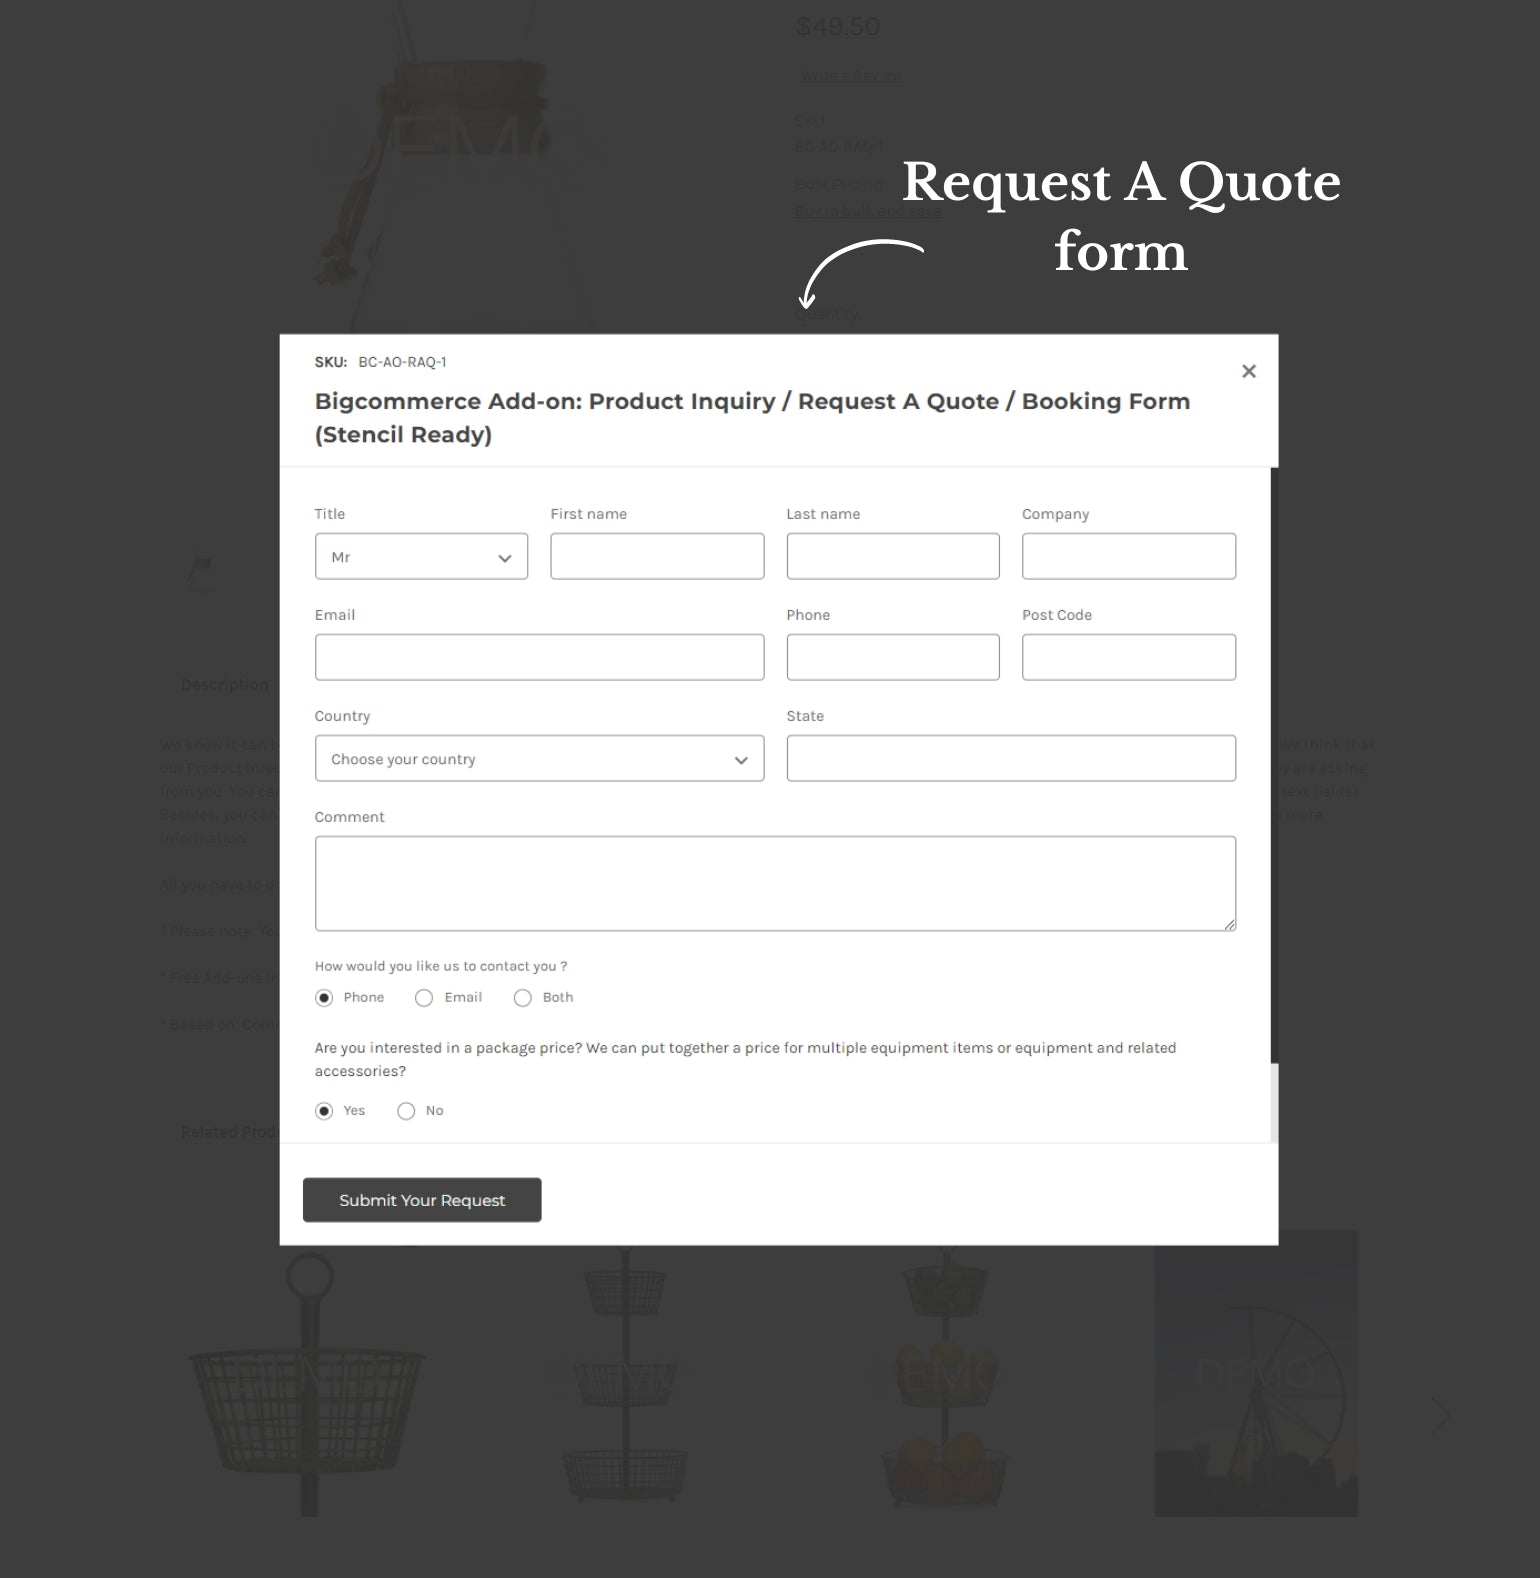 BigCommerce Add-on: Product Inquiry - Request A Quote - An awesome solution which allows potential customers to get a pricing information for your product or service. It's helpful to offer varied pricing based on a customer’s requirements.